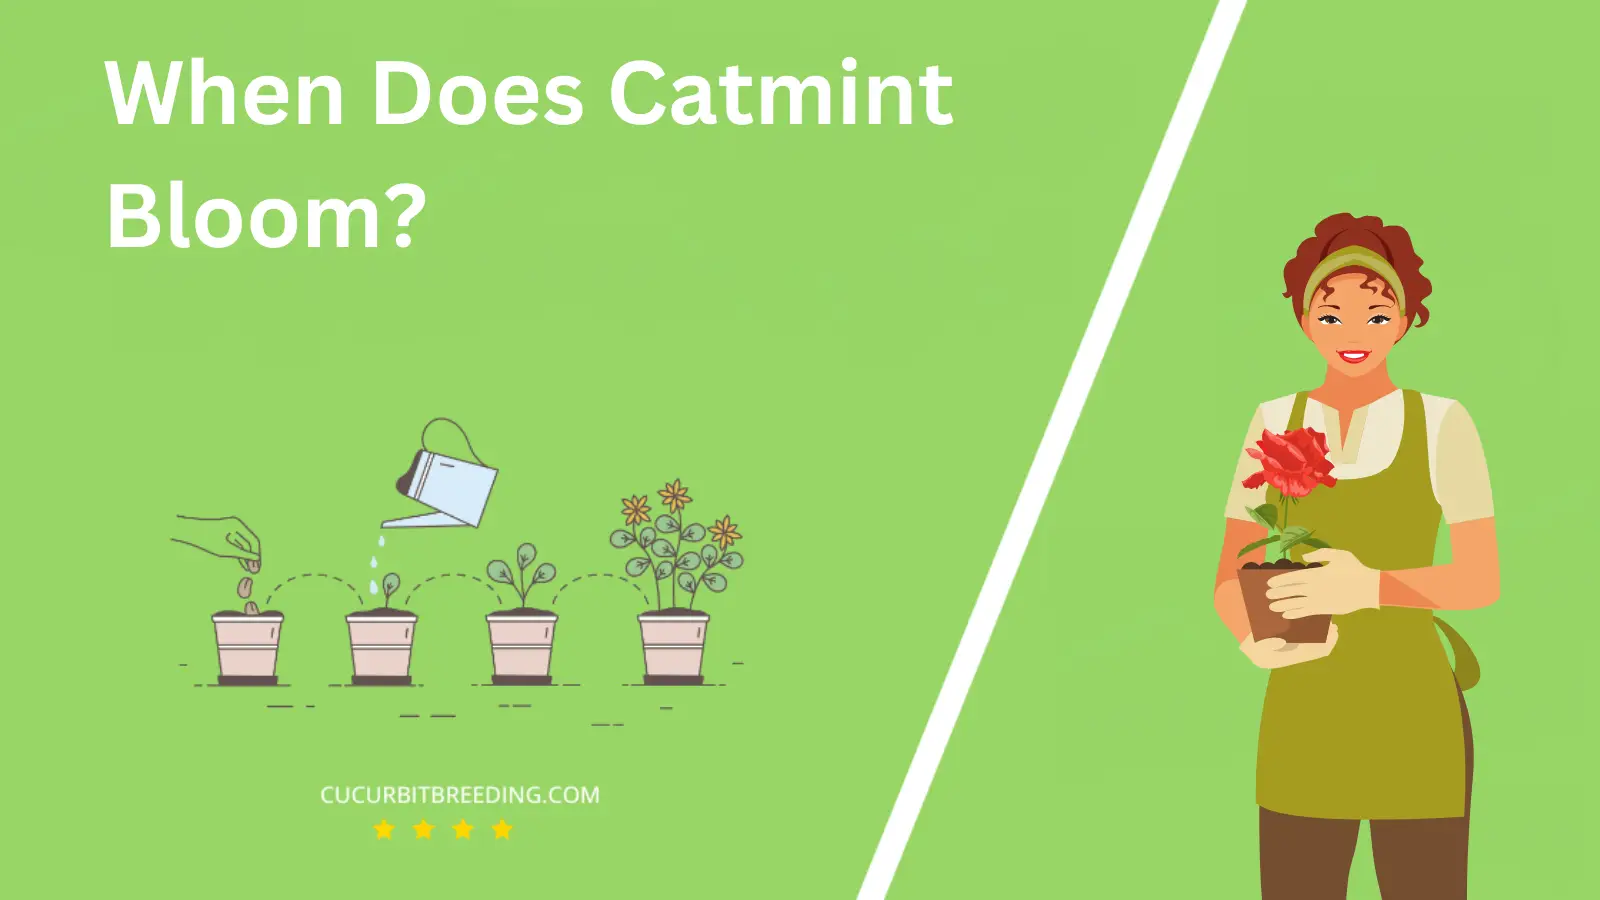 When Does Catmint Bloom?